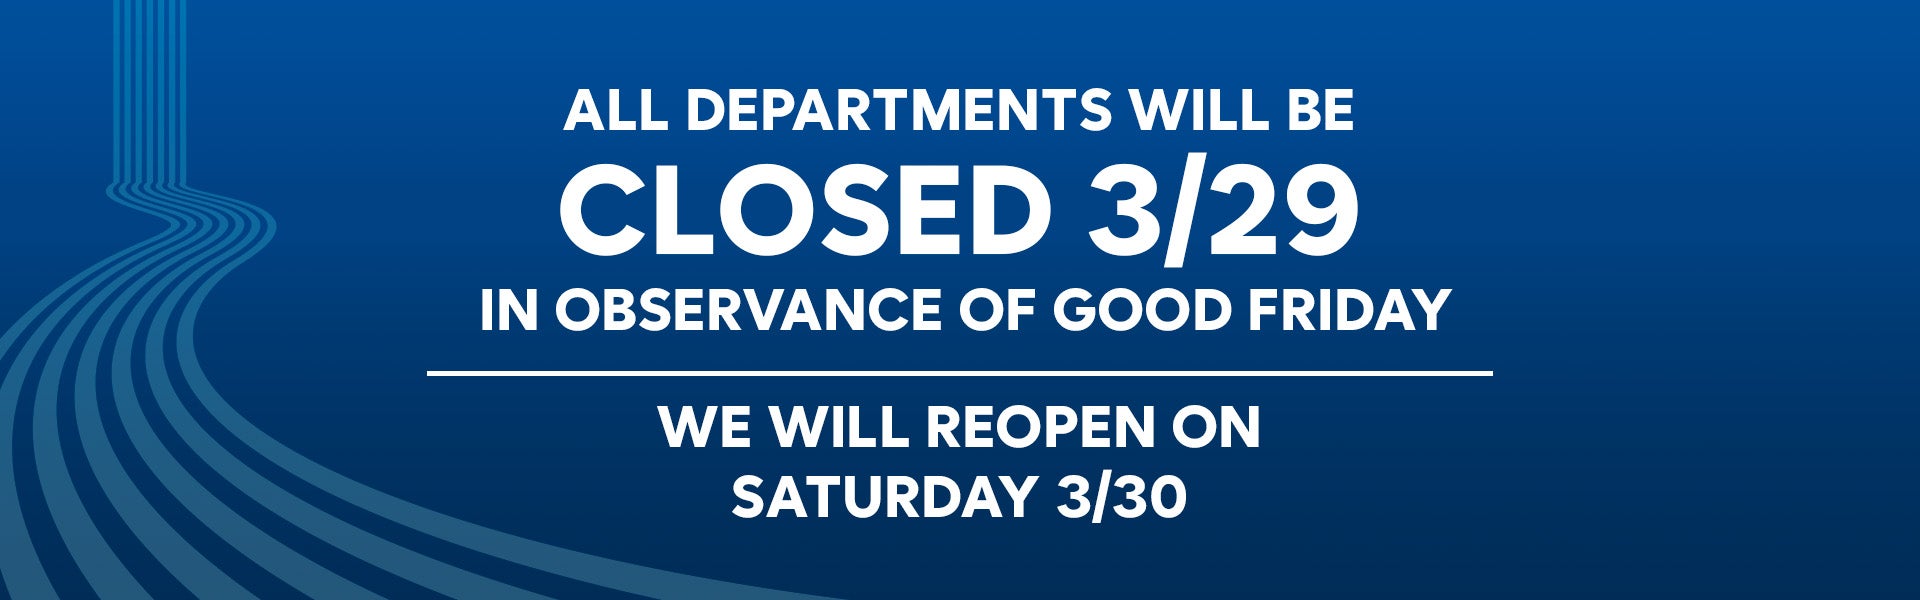 Observance of Good Friday Closure